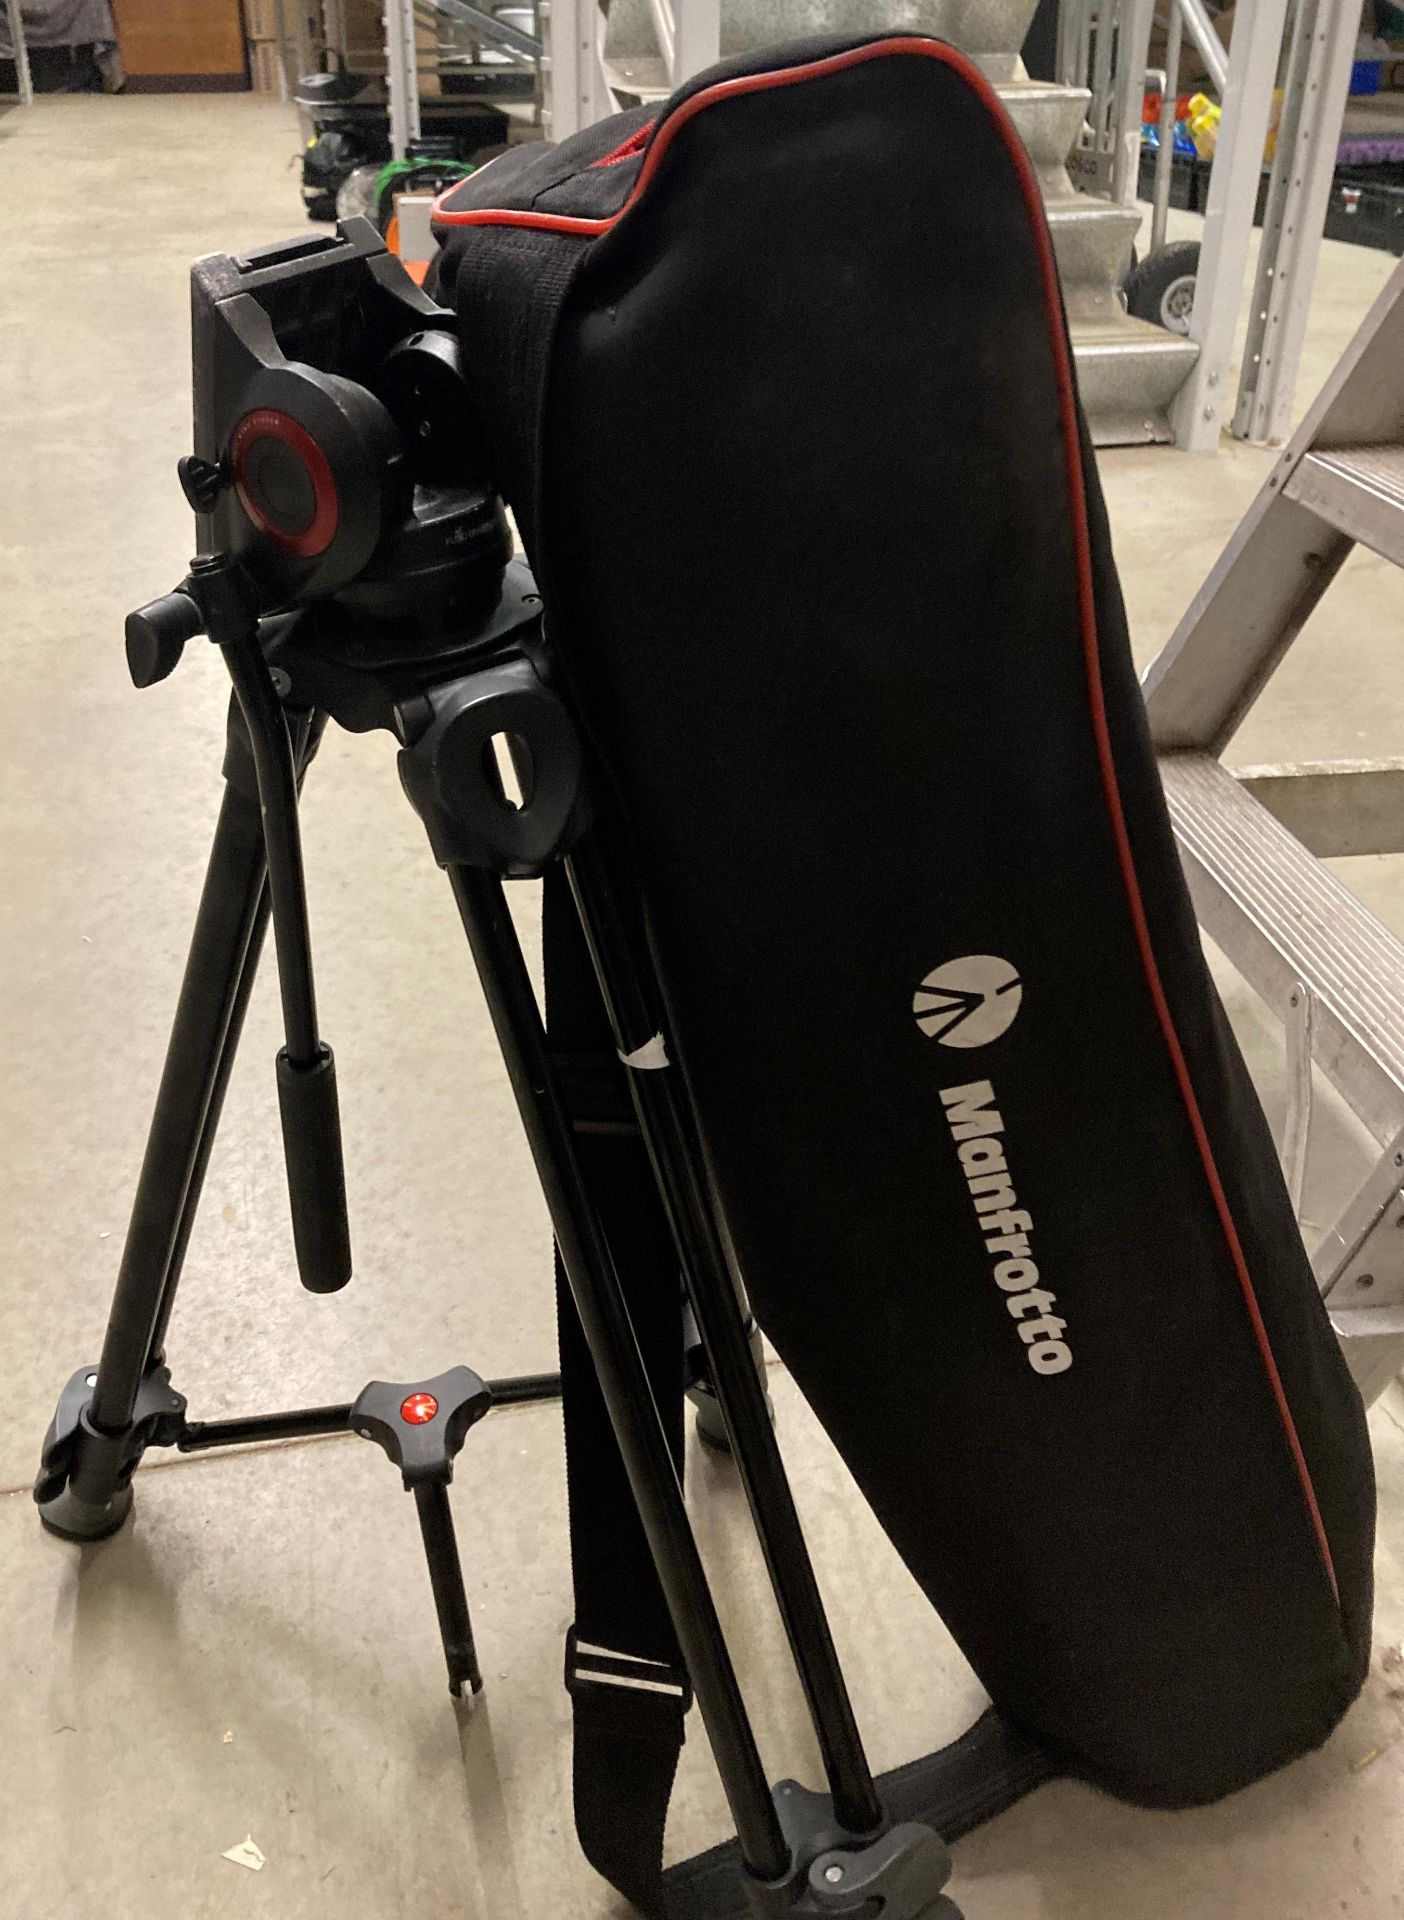 Manfrotto camera tripods and carry bag (saleroom location: D08)